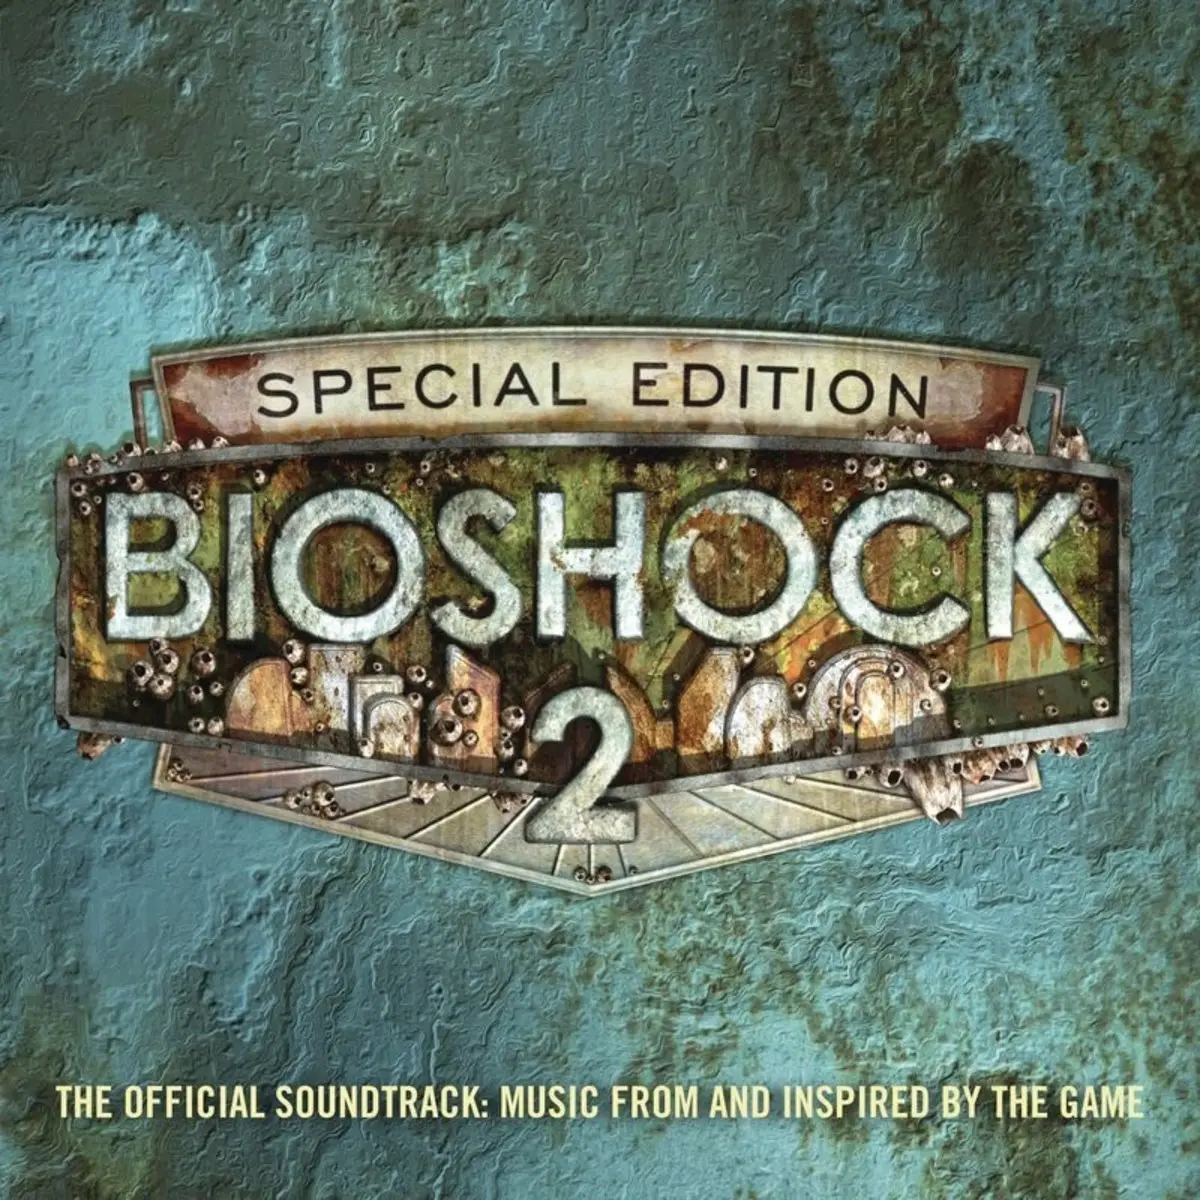 Dawn Of A New Day Song Of The World S Fair Lyrics In English Bioshock 2 The Official Soundtrack Music From And Inspired By The Game Special Edition Dawn Of A New